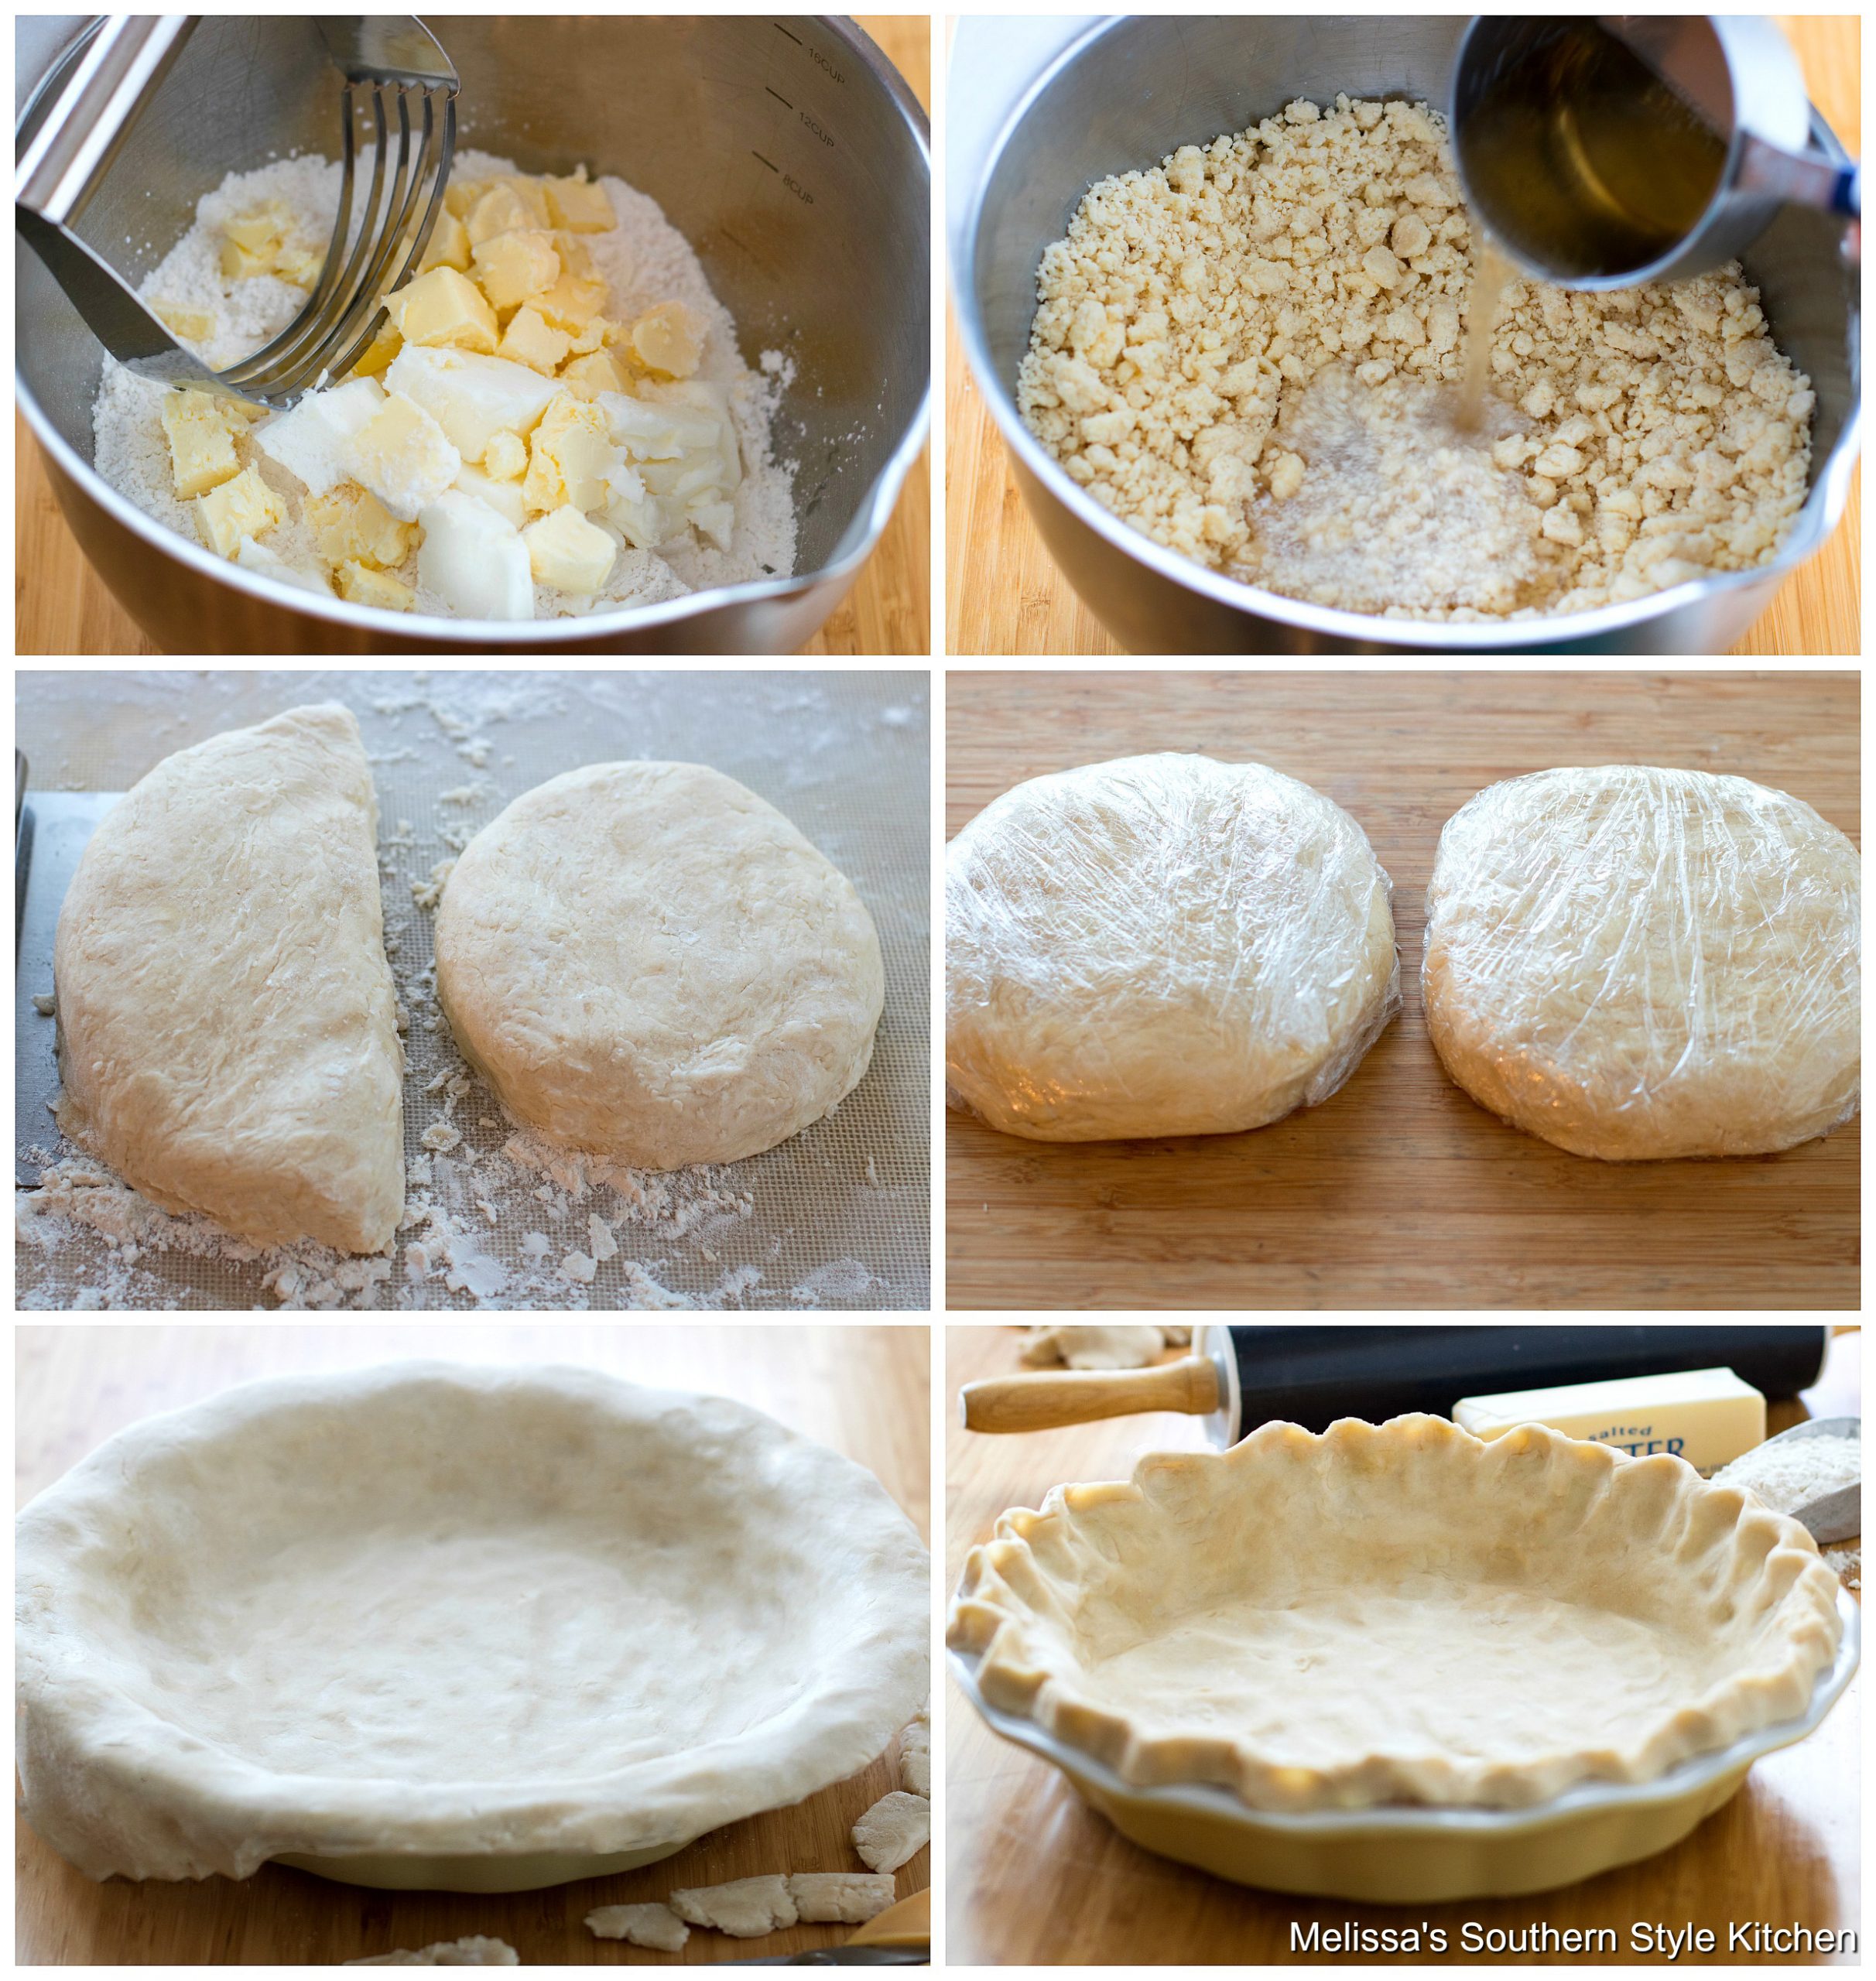 Step-by-step preparation images and ingredients for 7 Up Pie Crust